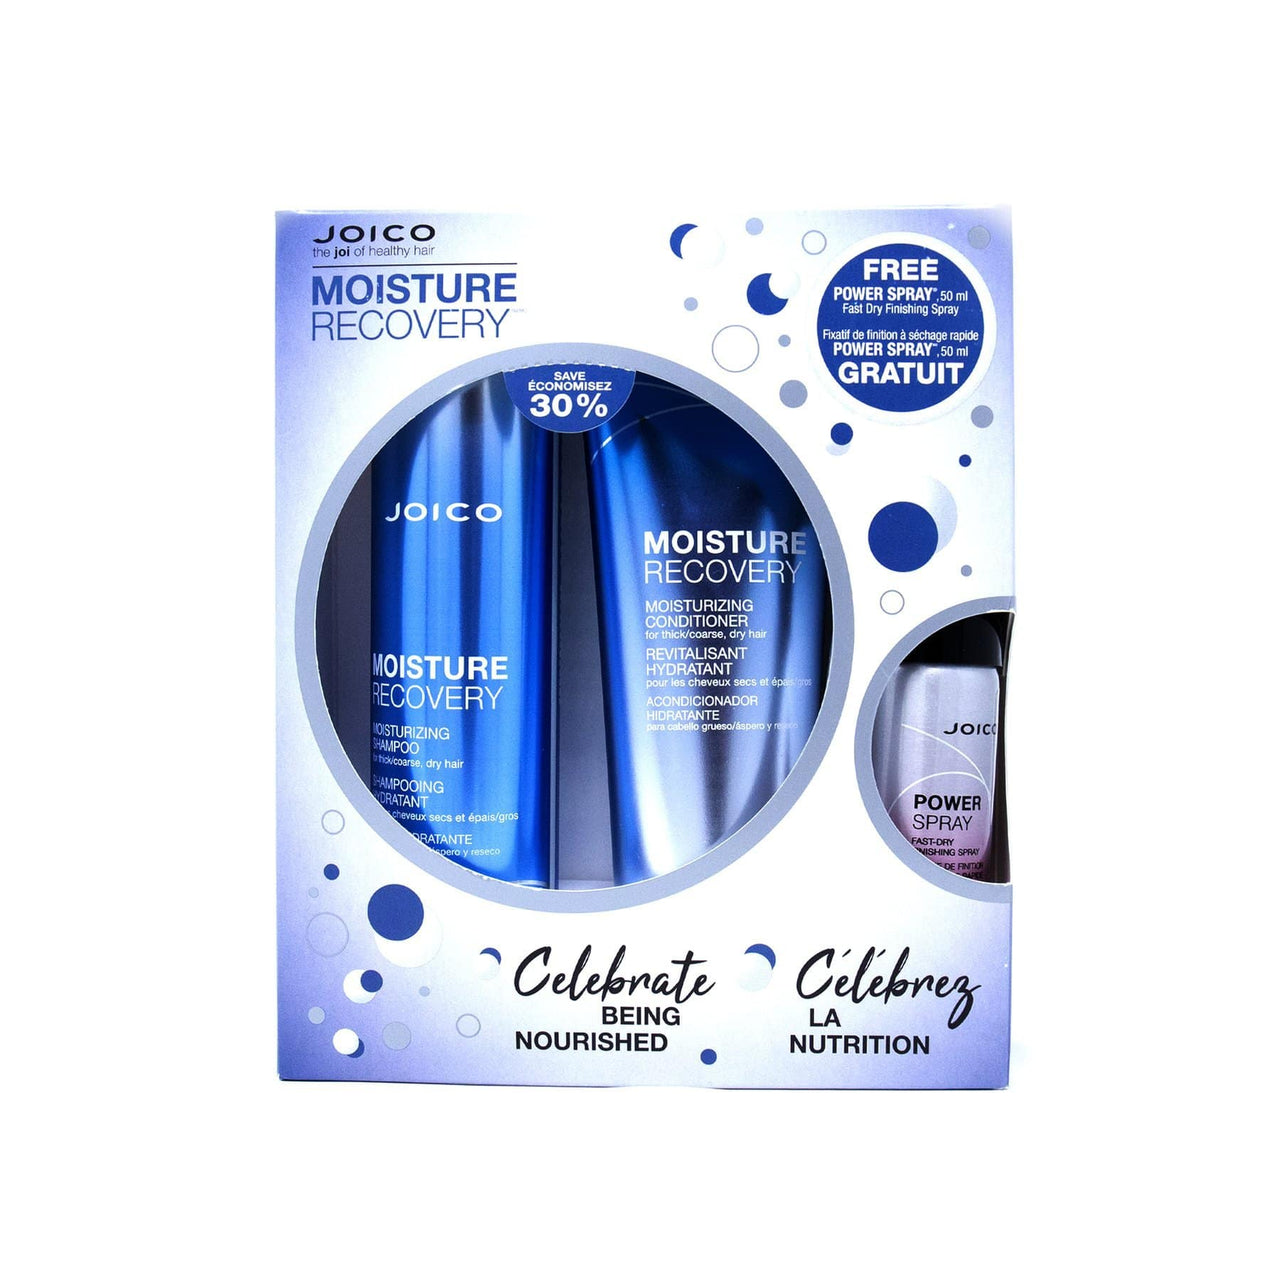 JOICO_Moisture Recovery Gift Set_Cosmetic World